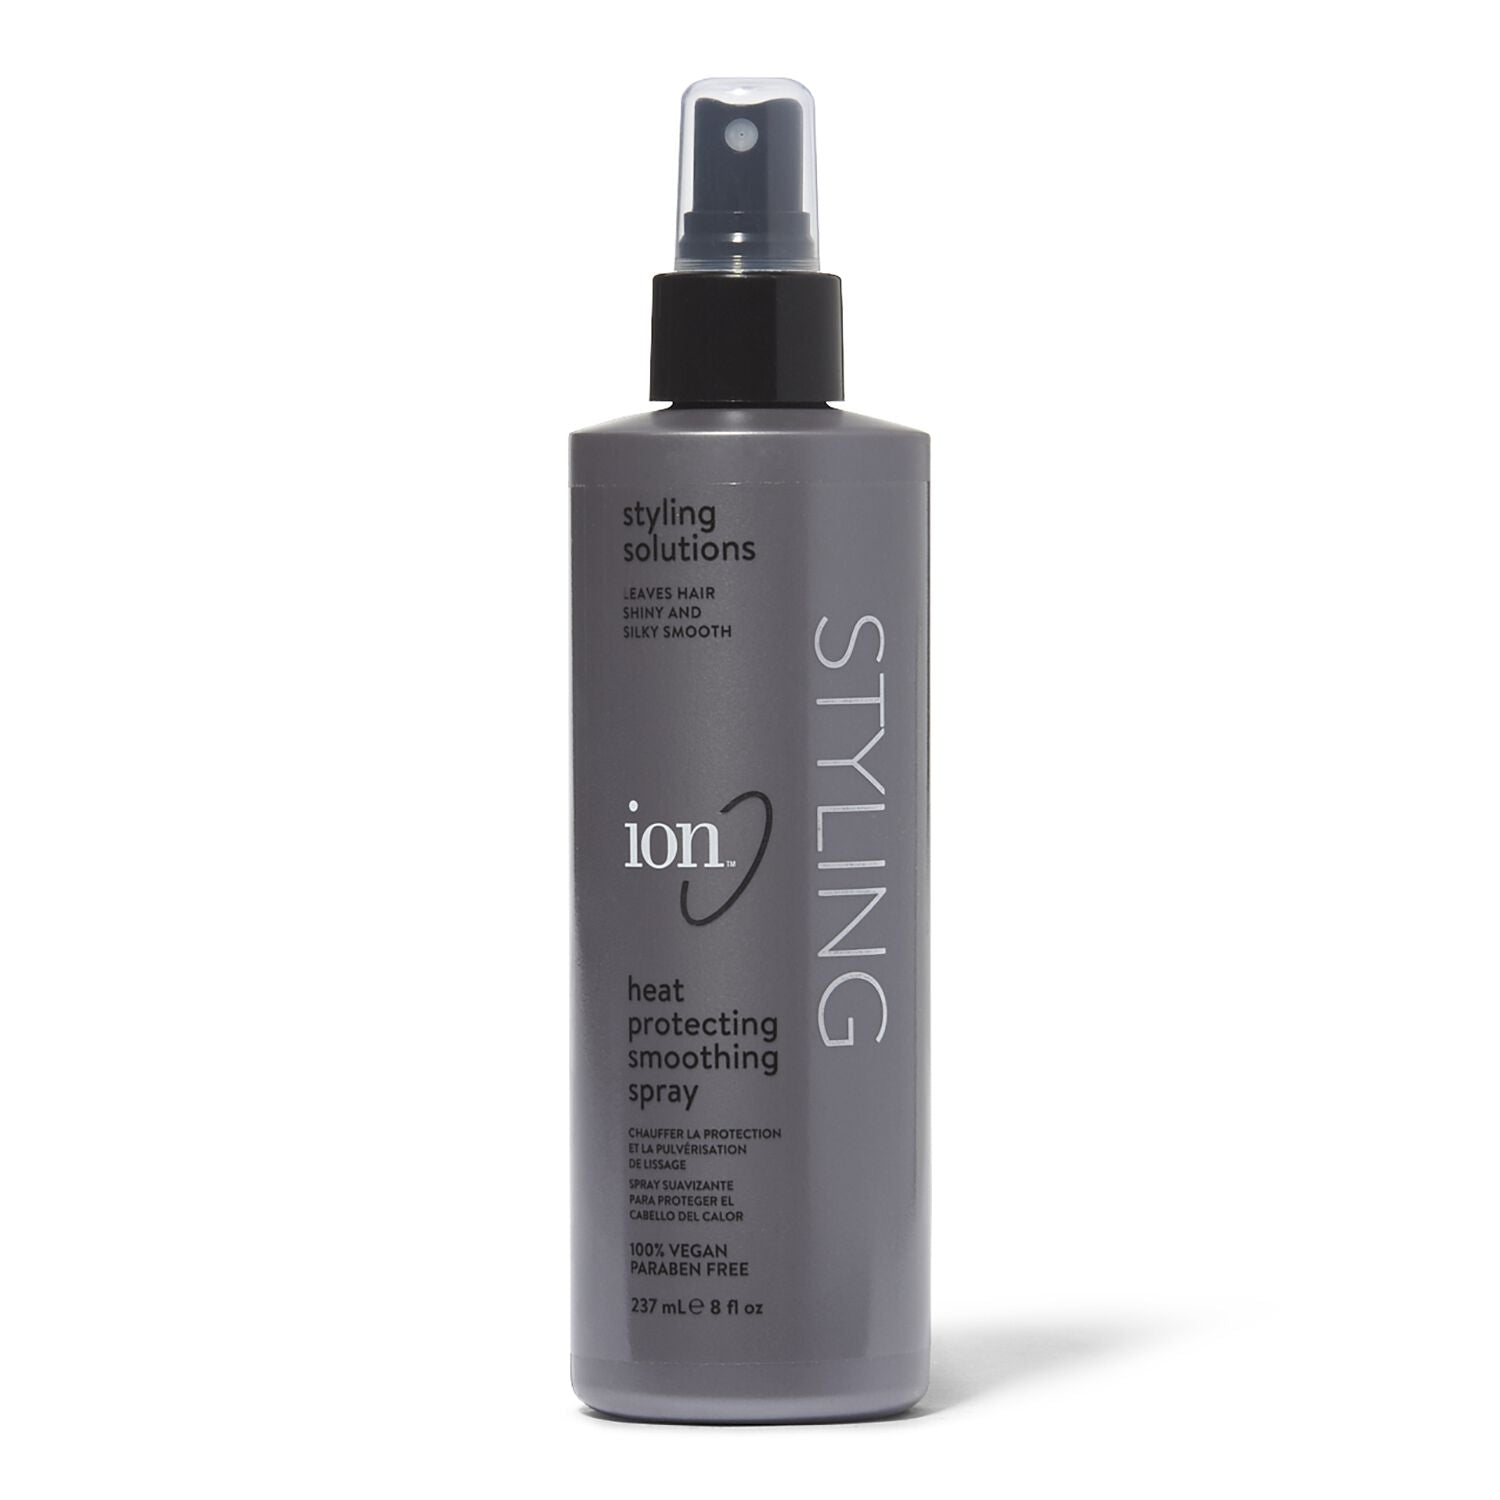 Styling Solutions  by   ion Heat Protecting Smoothing Spray